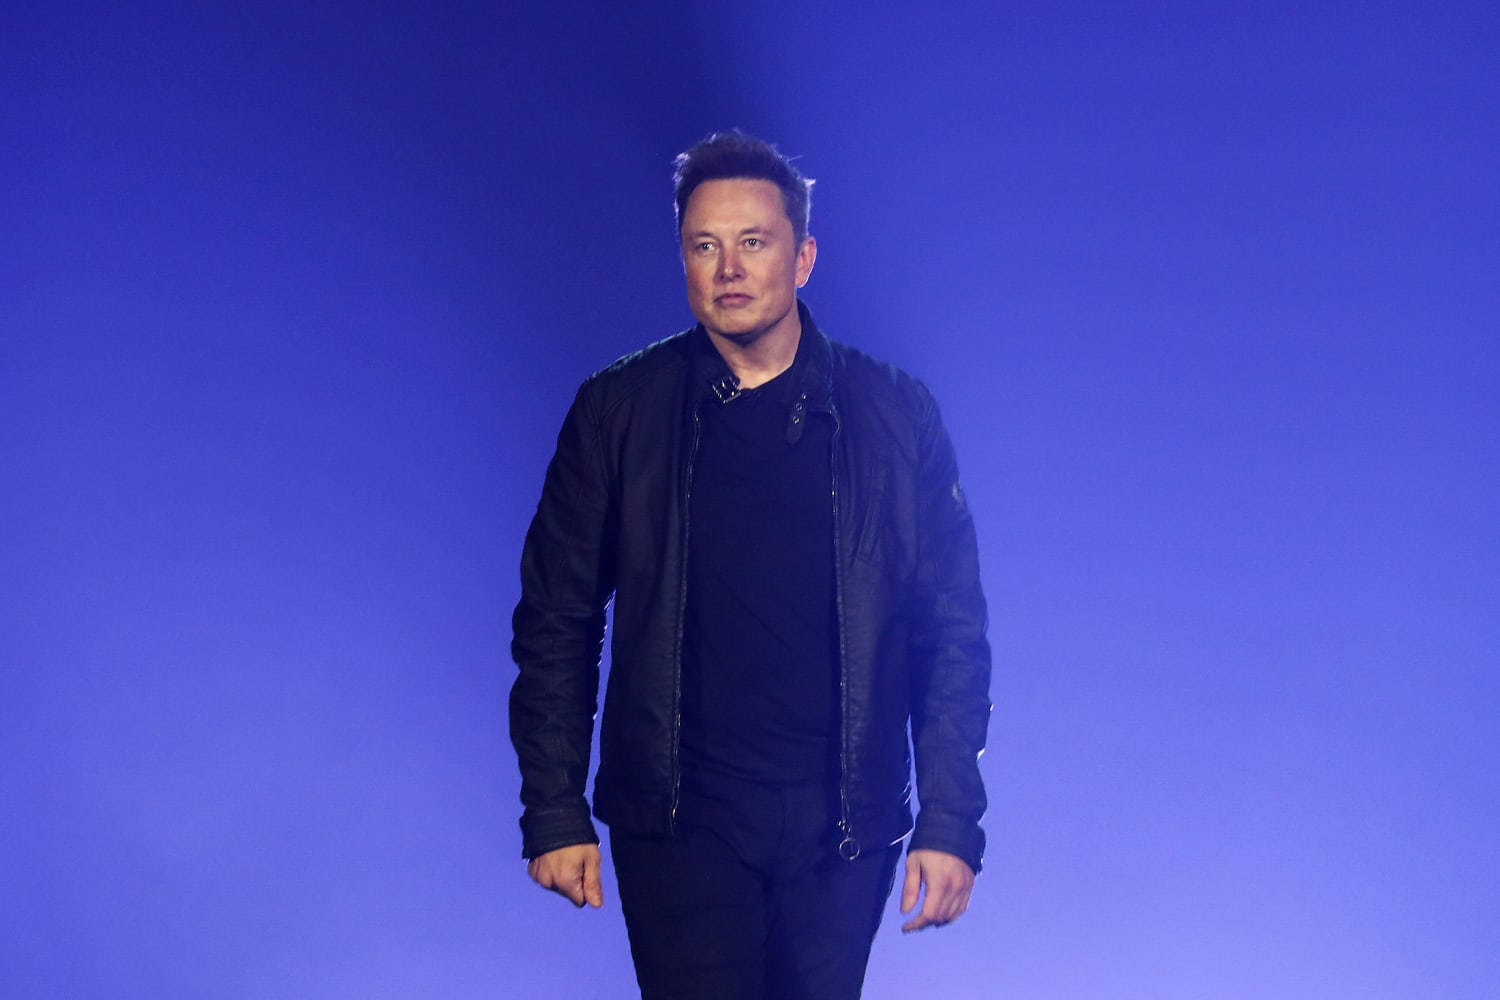 Elon Musk is targeting the Twitter employee by claiming he used his disability as an excuse